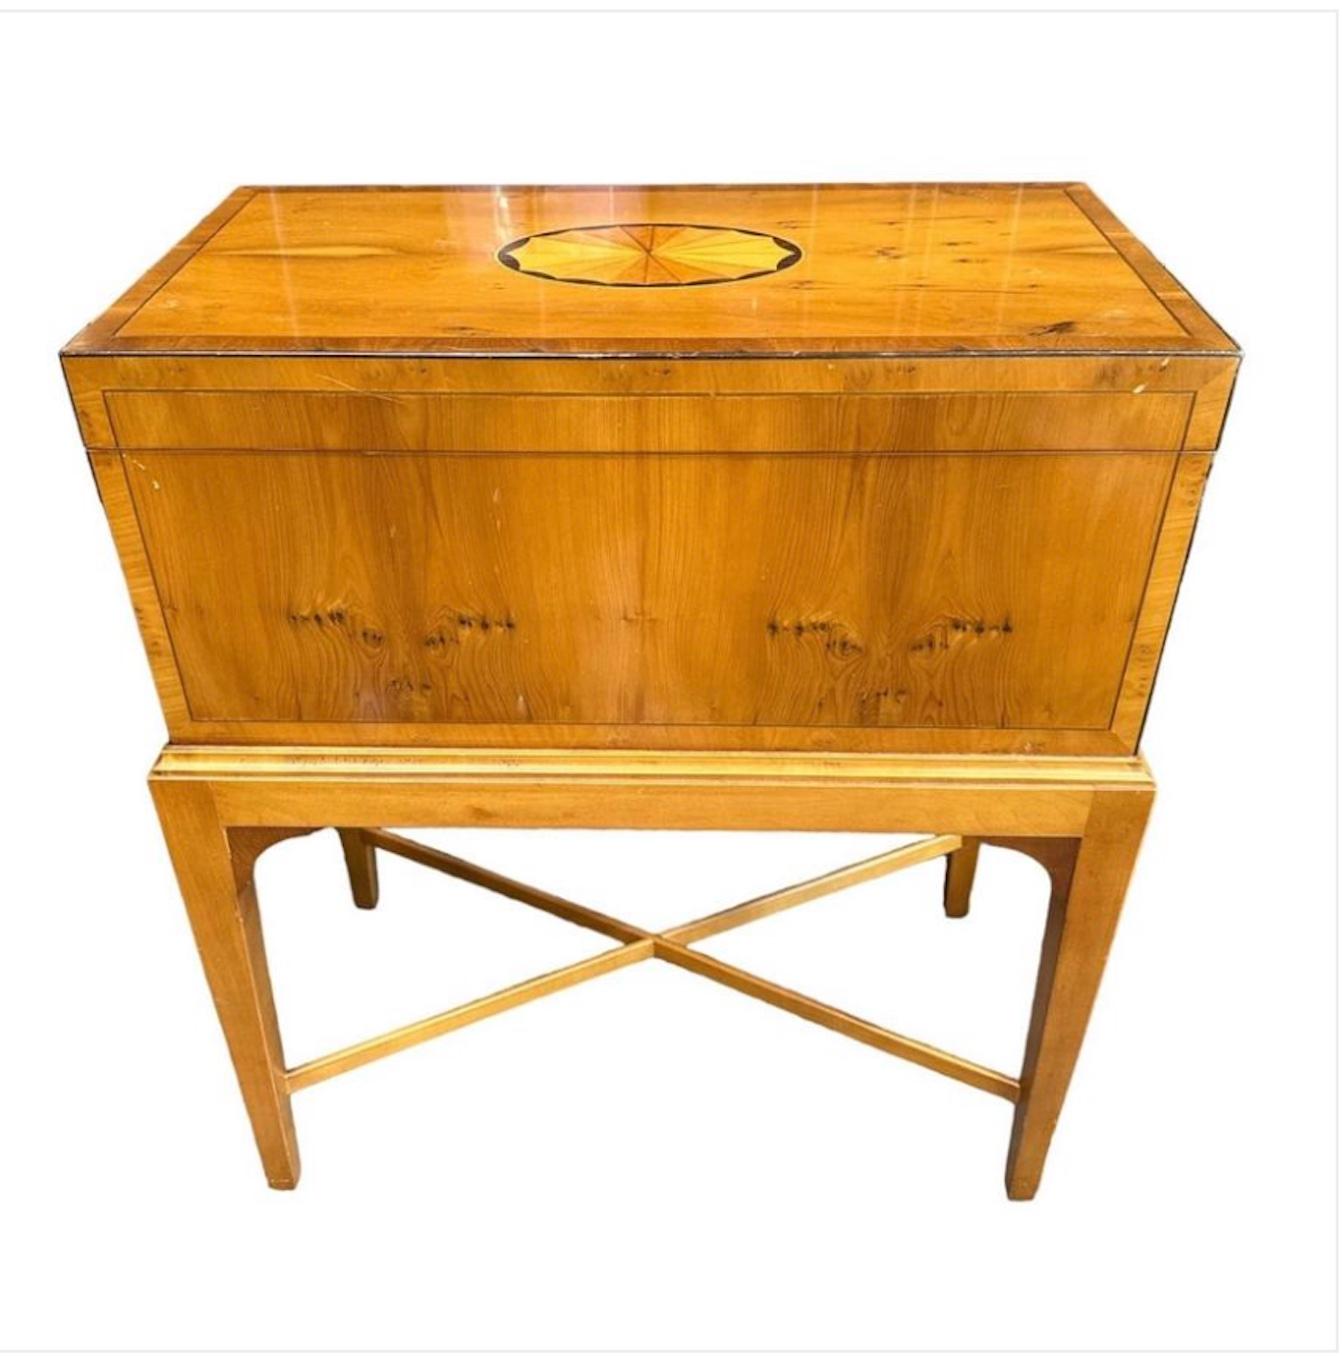 George III Baker Furniture Side Table Or Humidor. Satinwood With Inlay.